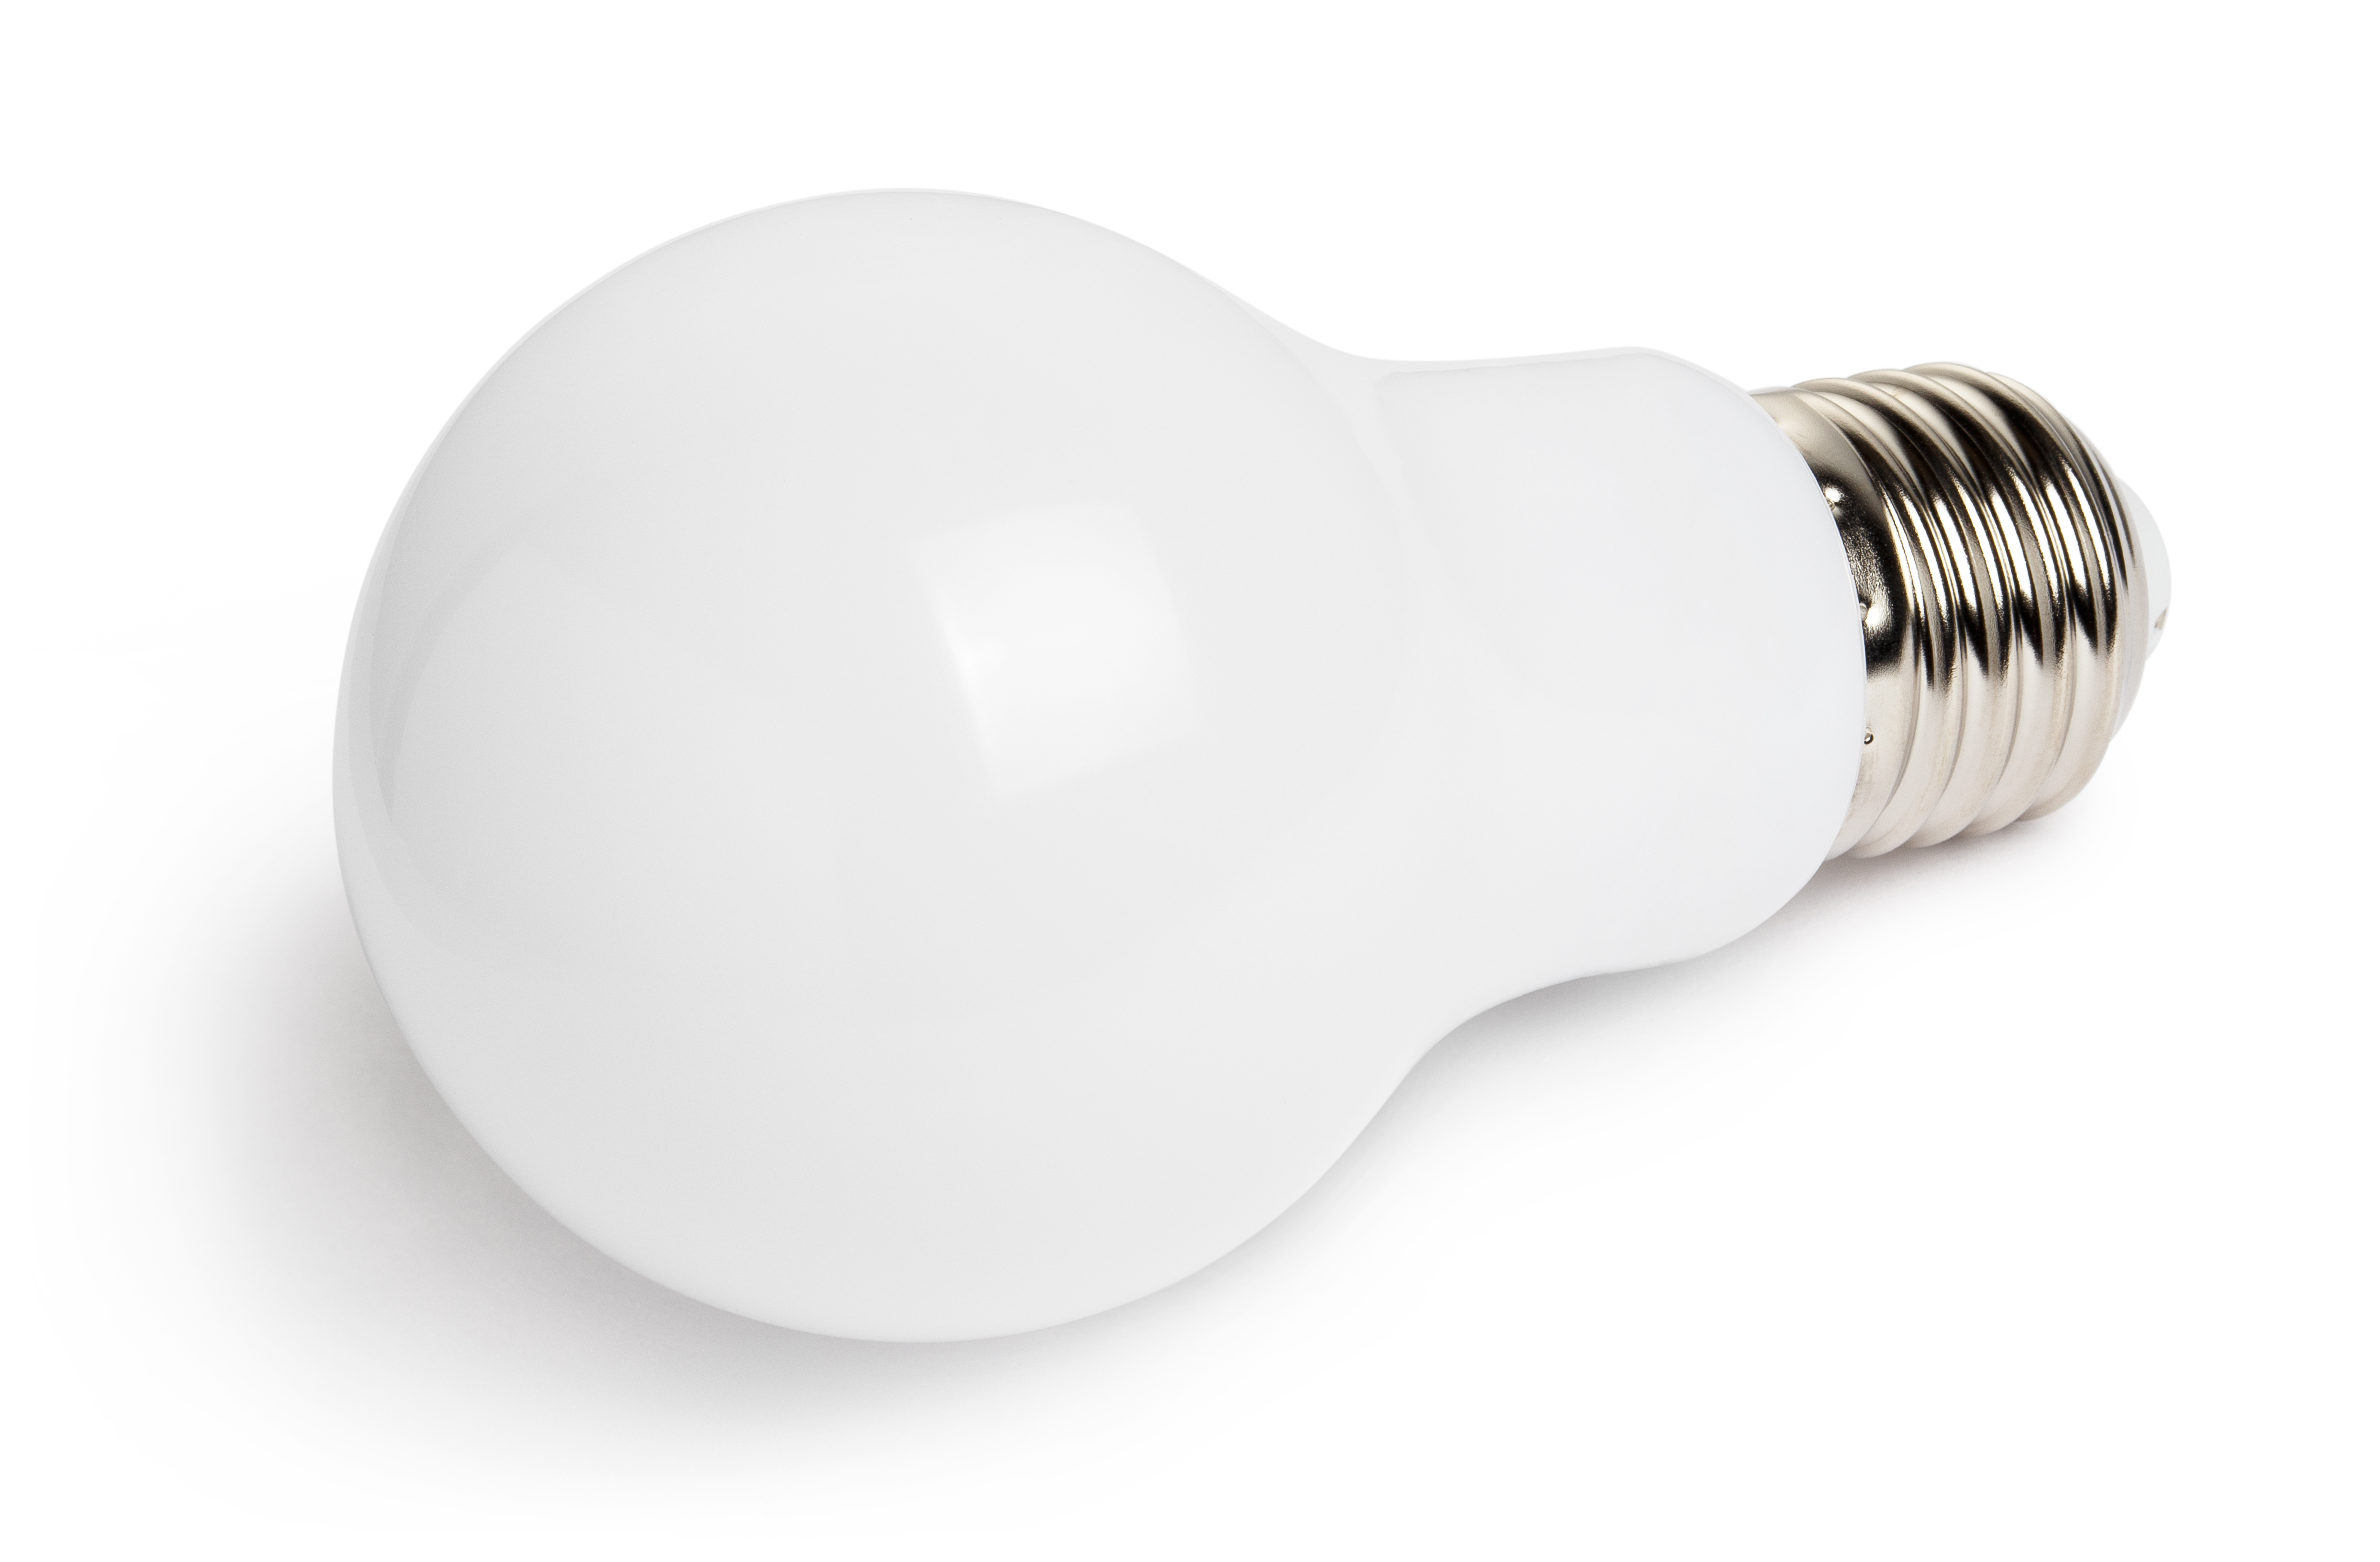 Switching to more energy-efficient bulbs will help trim your energy bills